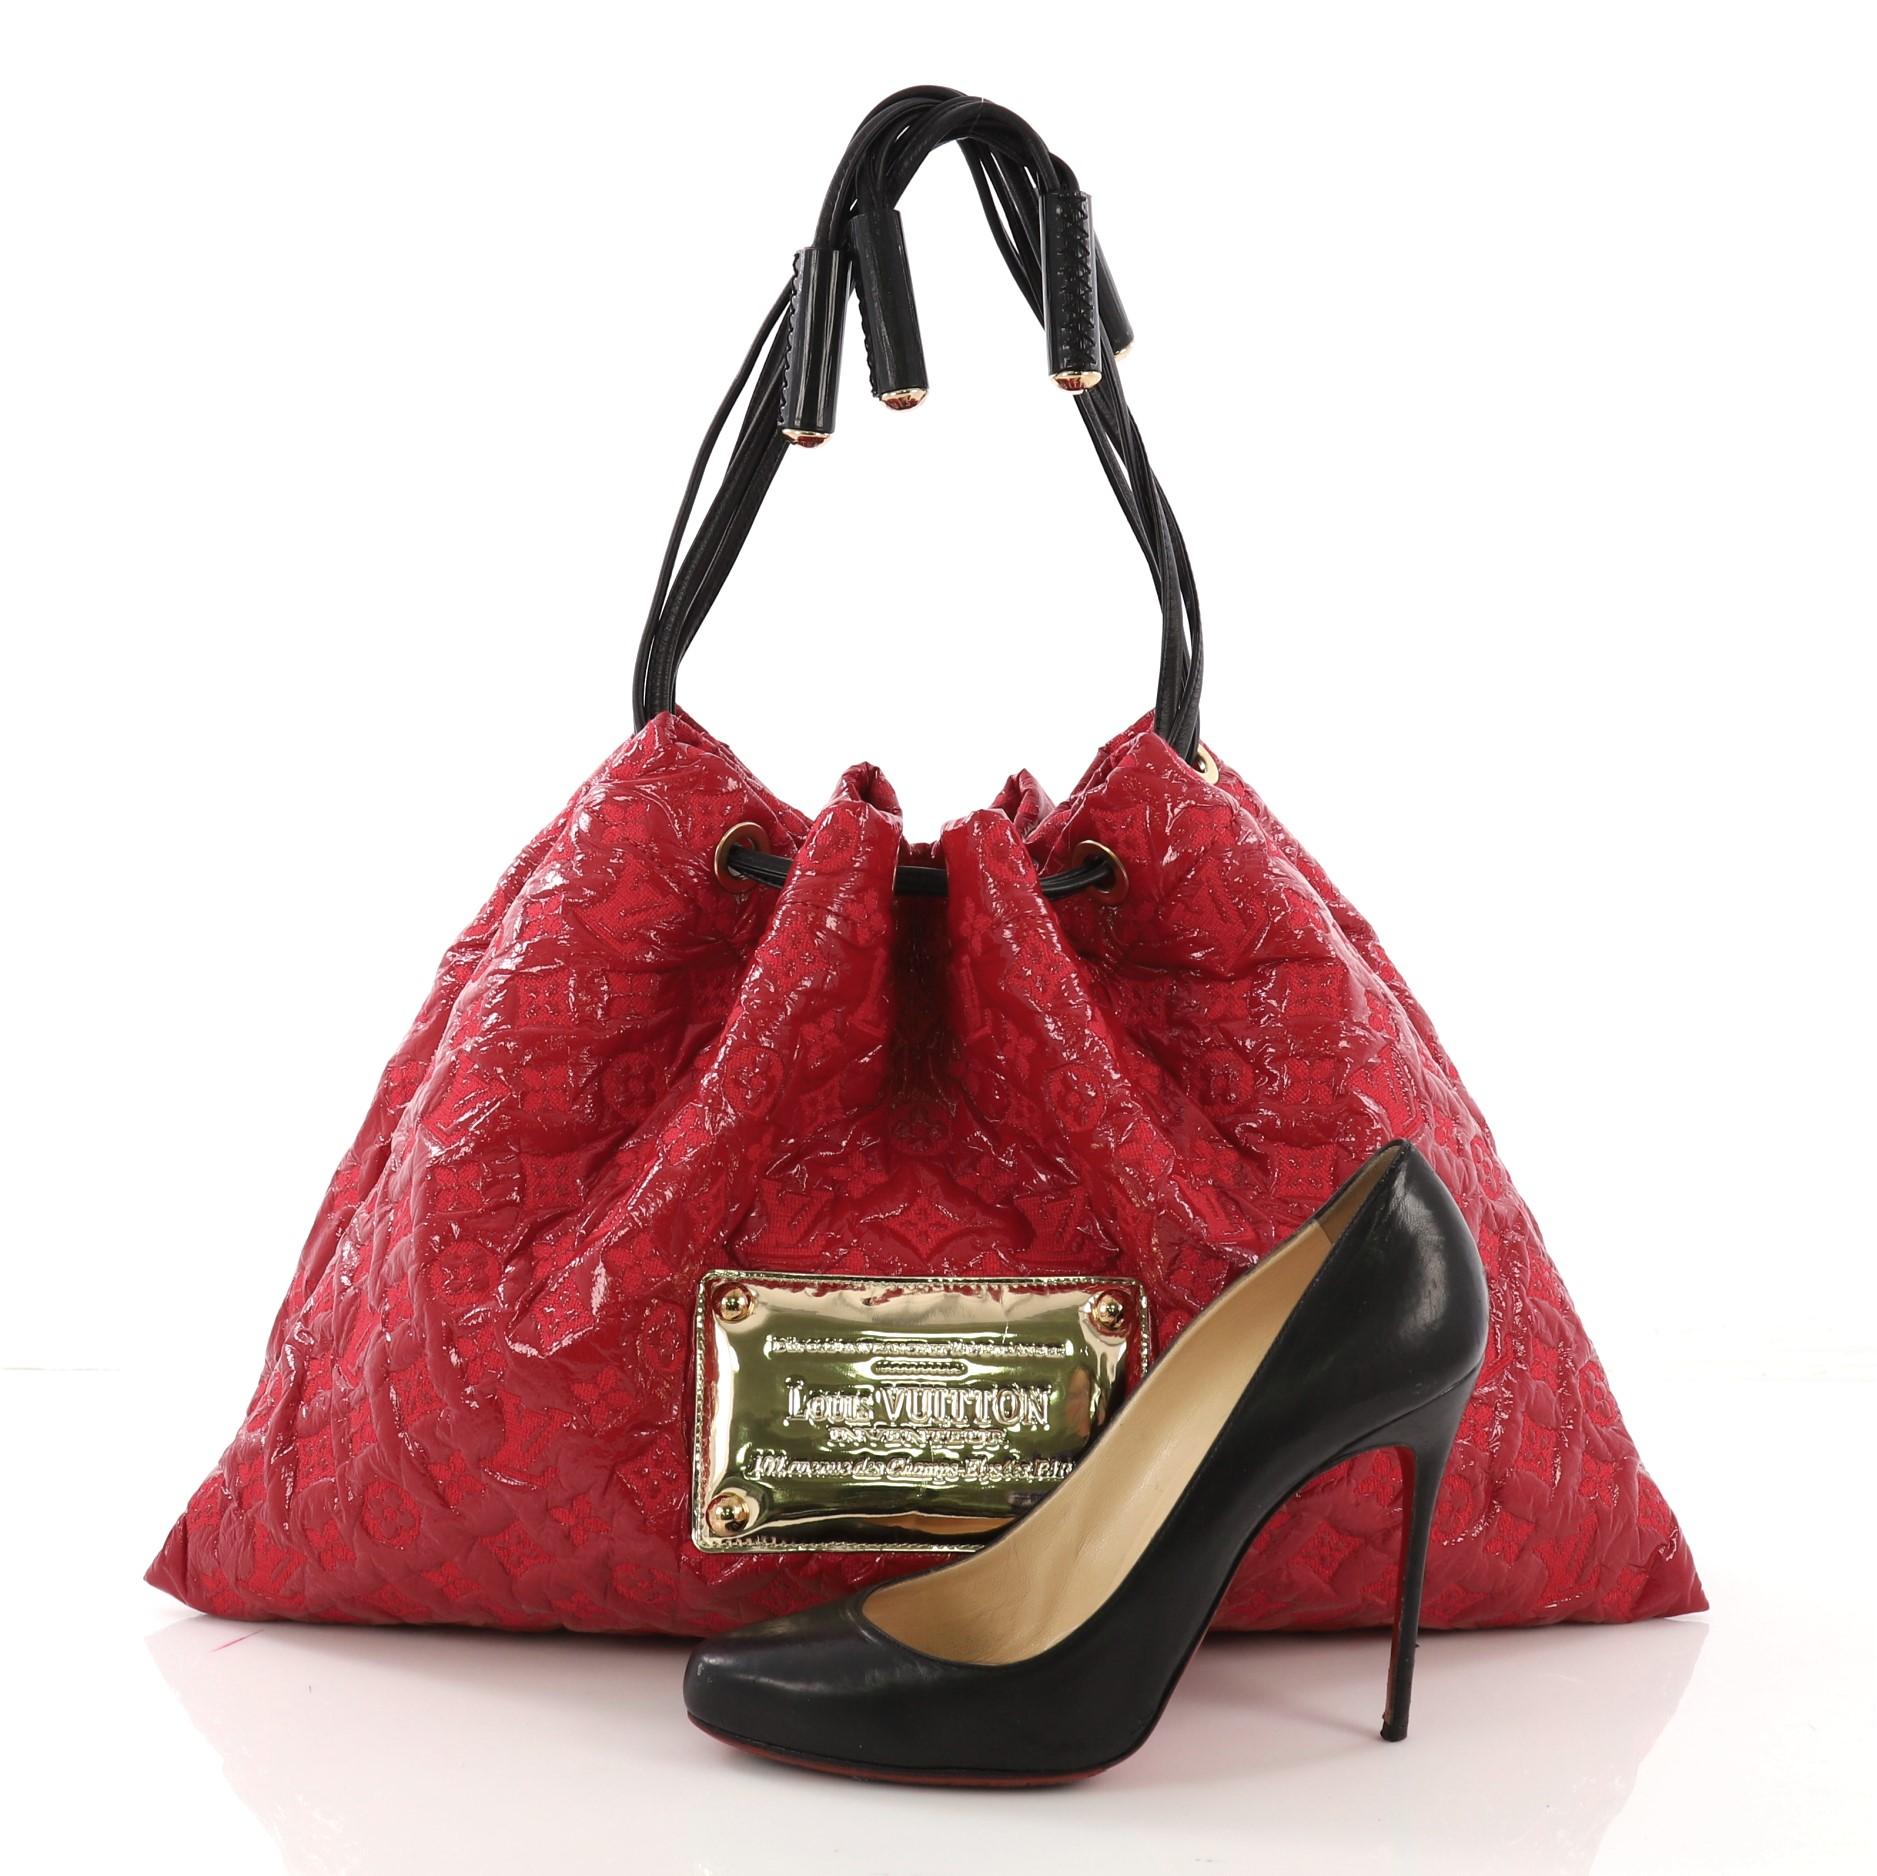 This Louis Vuitton Squishy Tote Monogram Vinyl, crafted in red monogram vinyl, features a gold plated LV logo at the center, contrasting black leather cinch cords threaded through rivets, and gold-tone hardware. Its drawstring closure opens to a